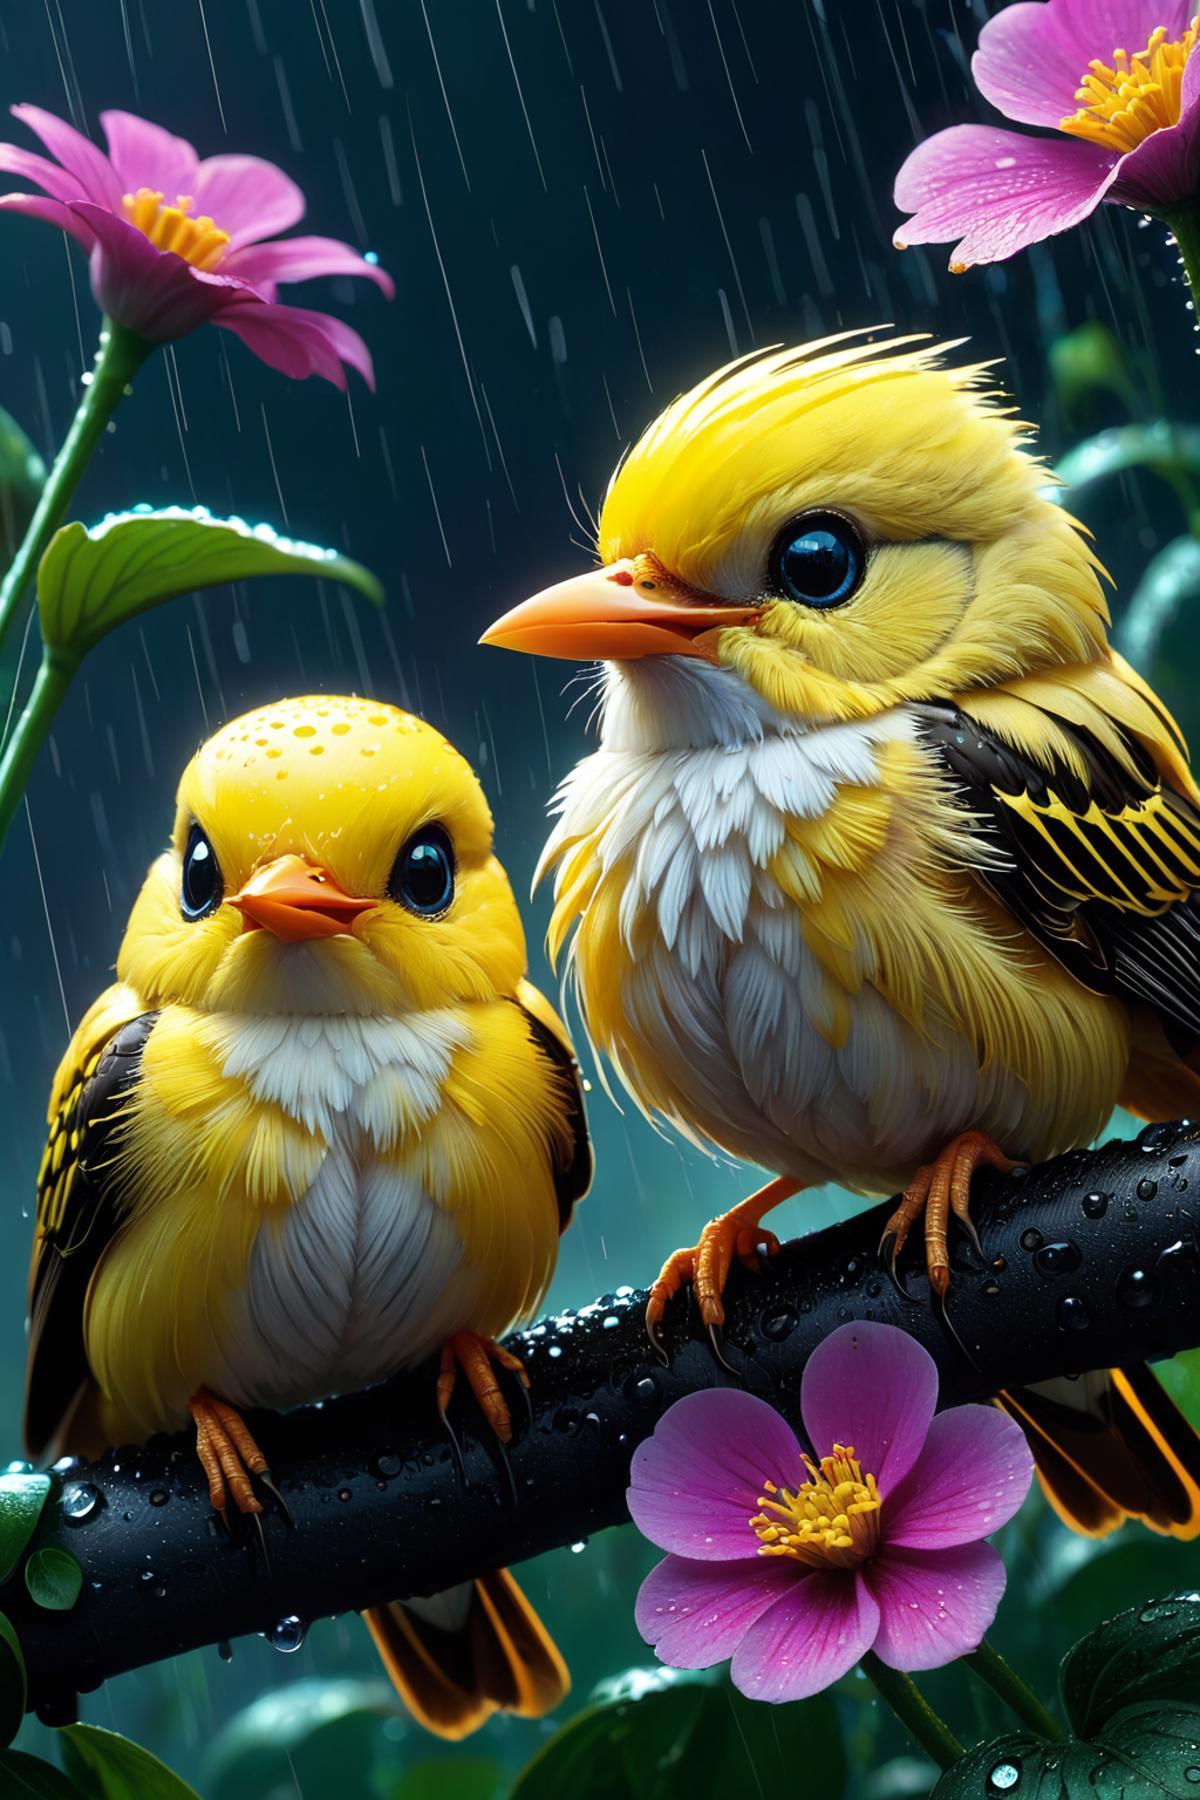 Two Yellow Birds Perched on a Branch in the Rain.